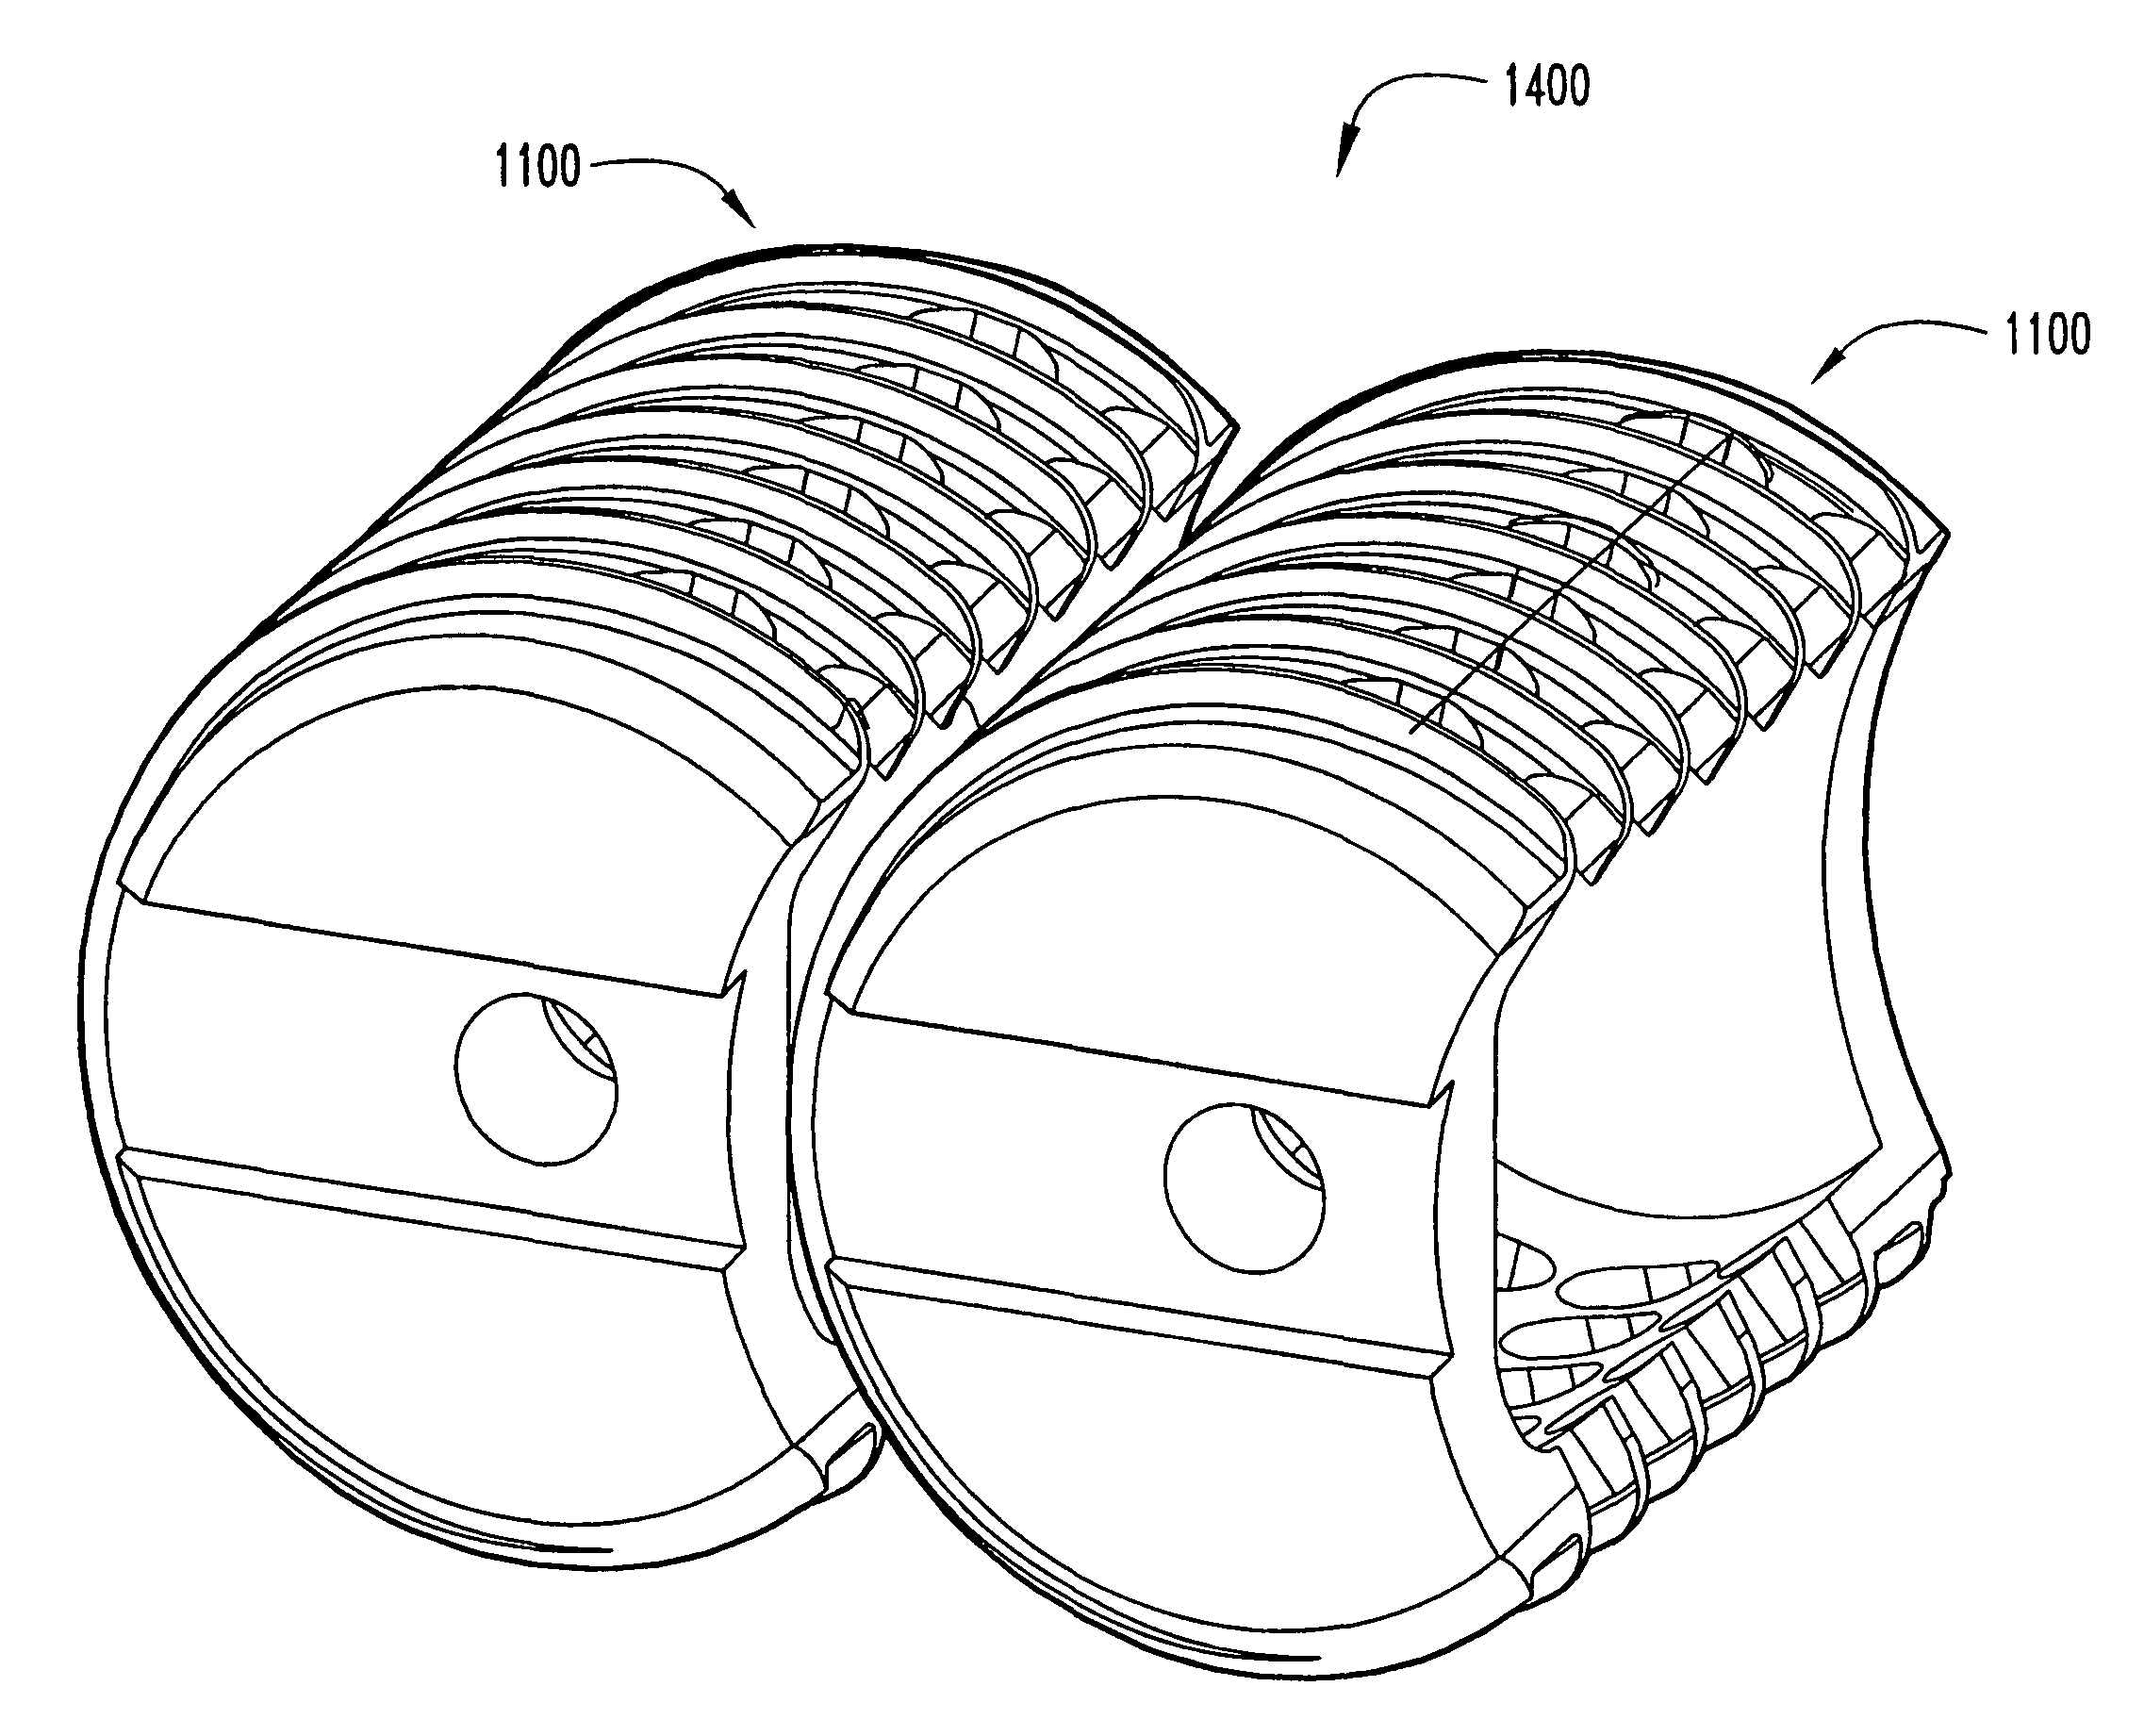 Intervertebral spacers with side wall accessible interior cavity